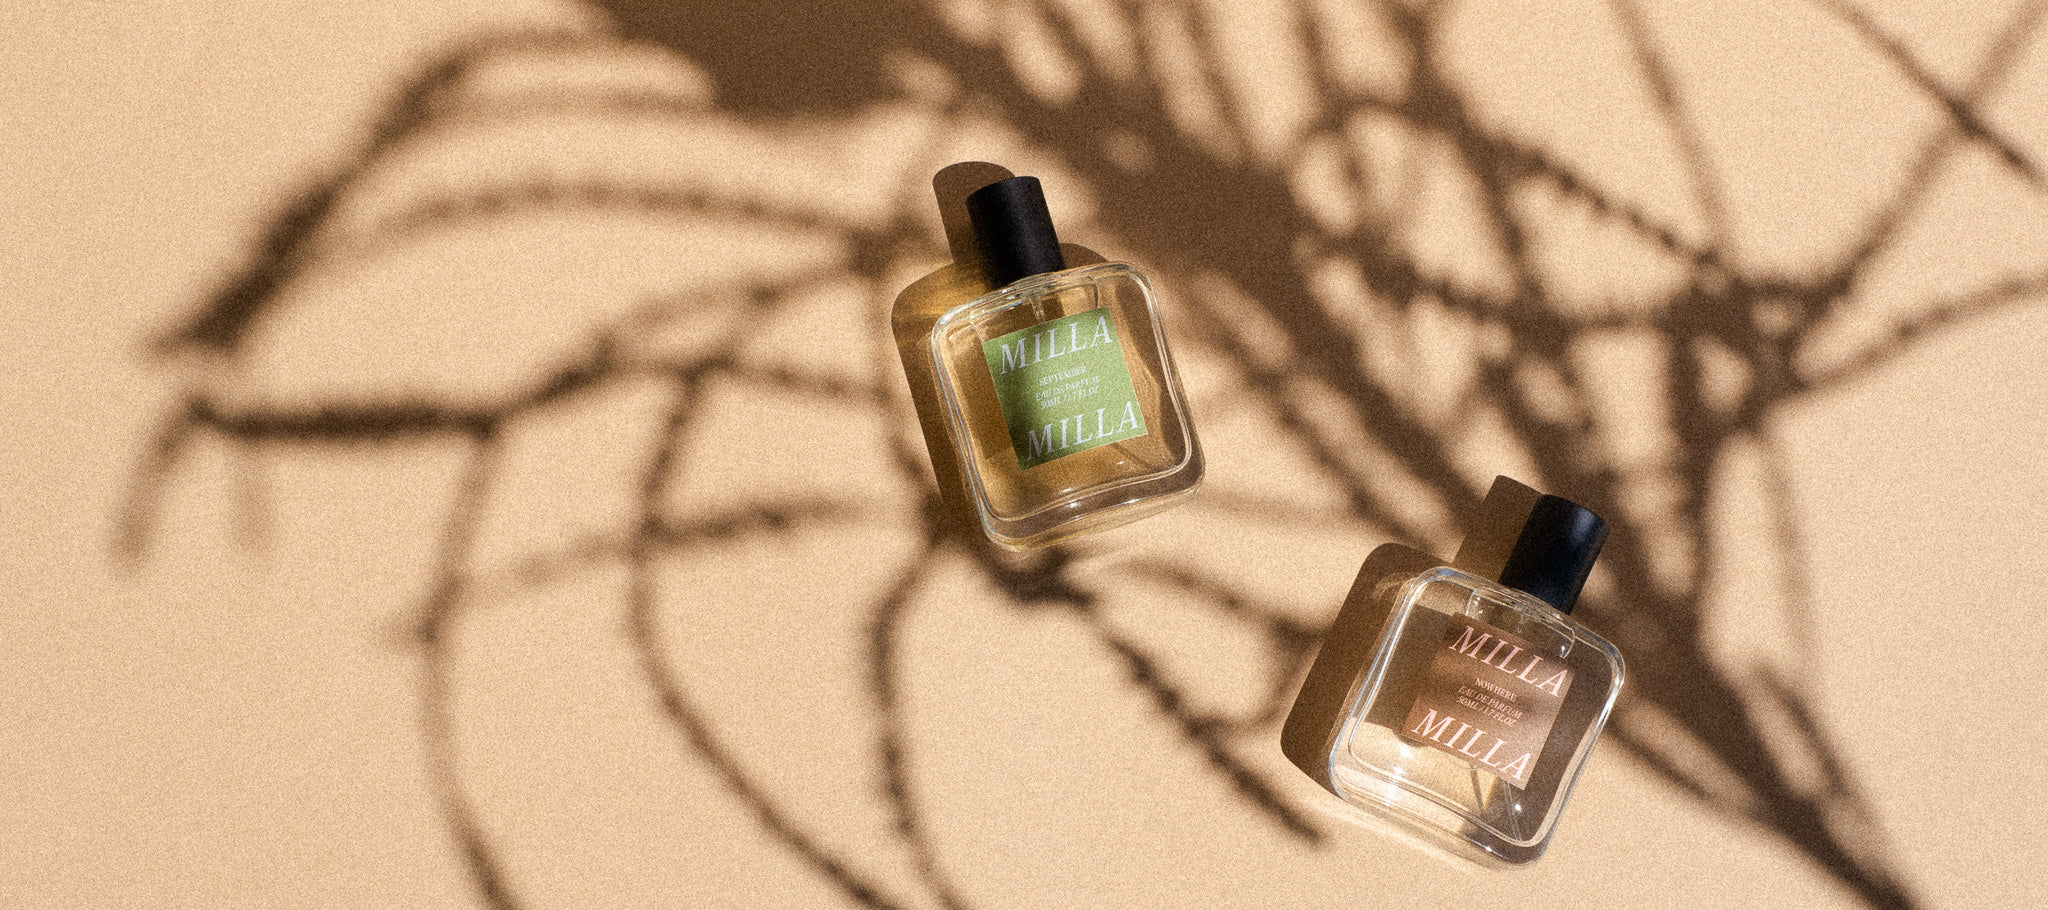 Milla Milla perfume Nowhere and September bottles with native flower shadows